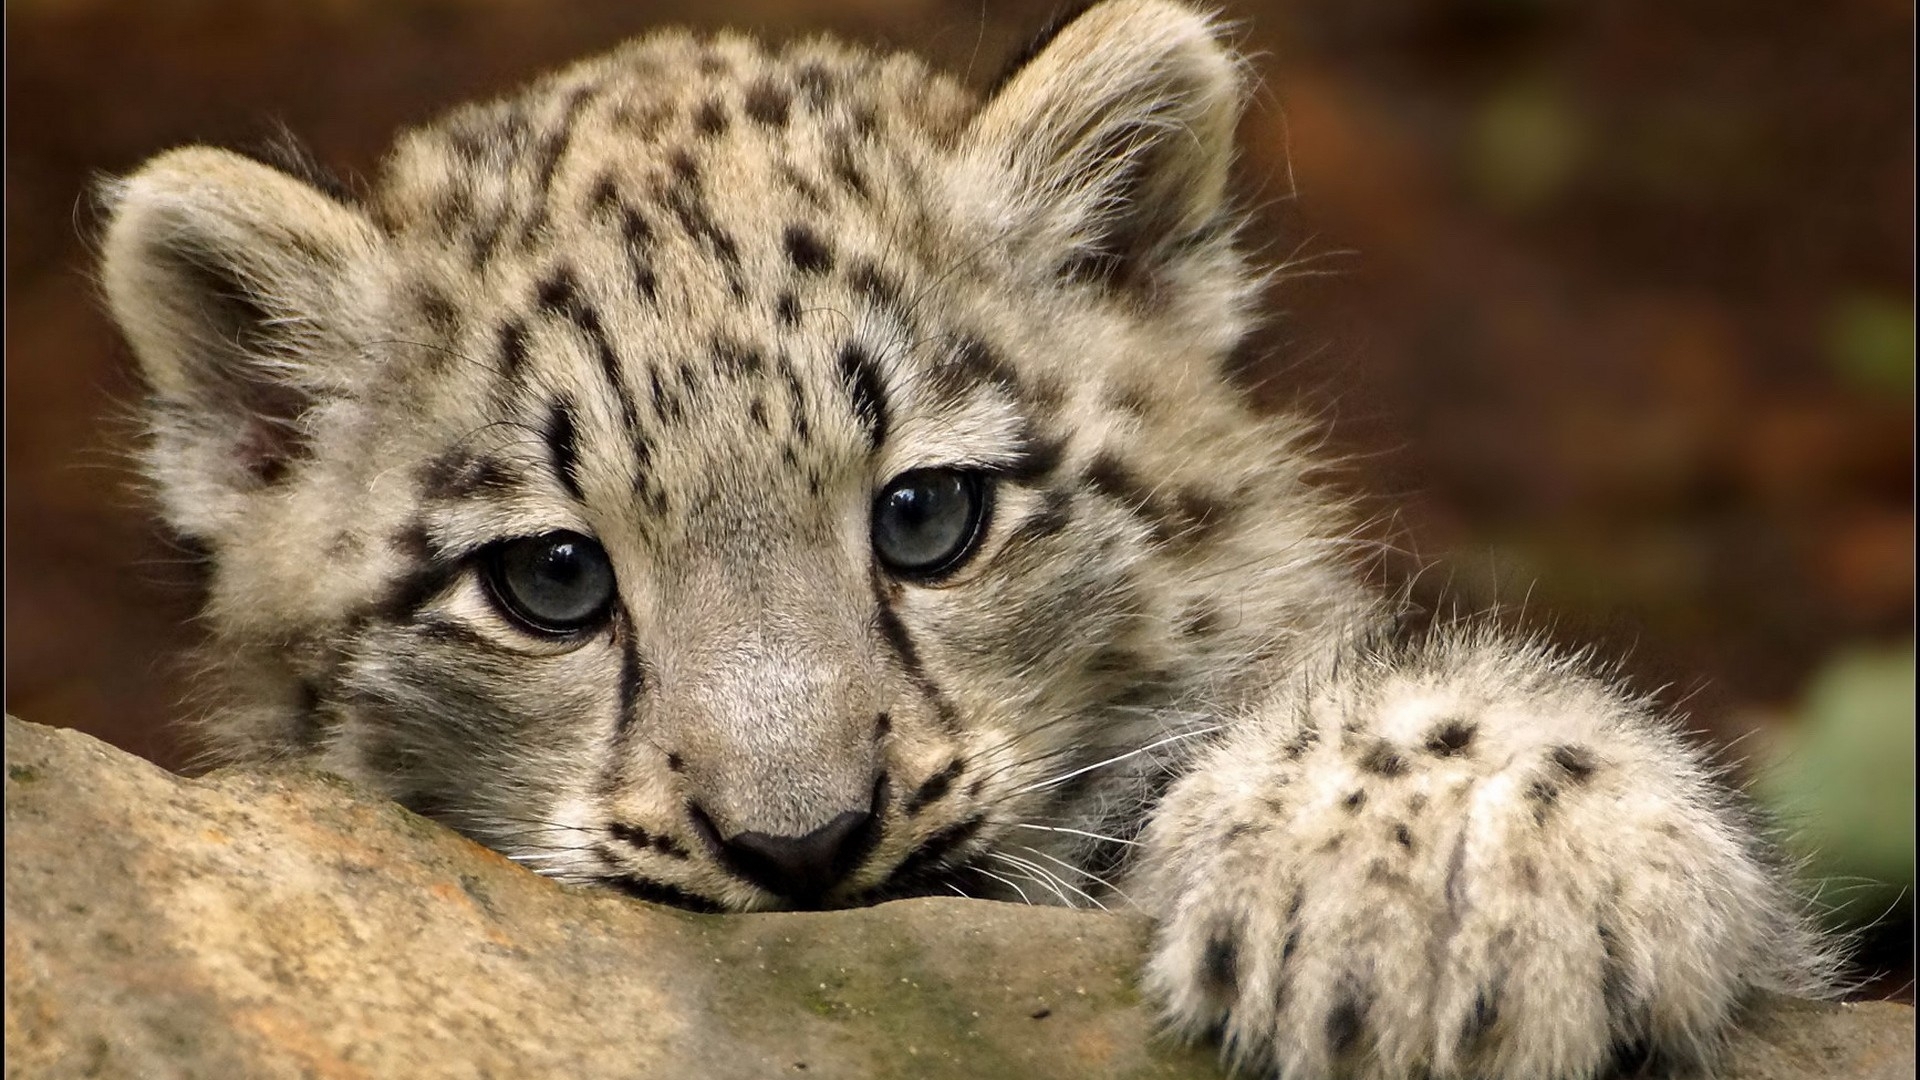 Two adorable snow leopard cubs make their debut at Stone Zoo - The Boston Globe